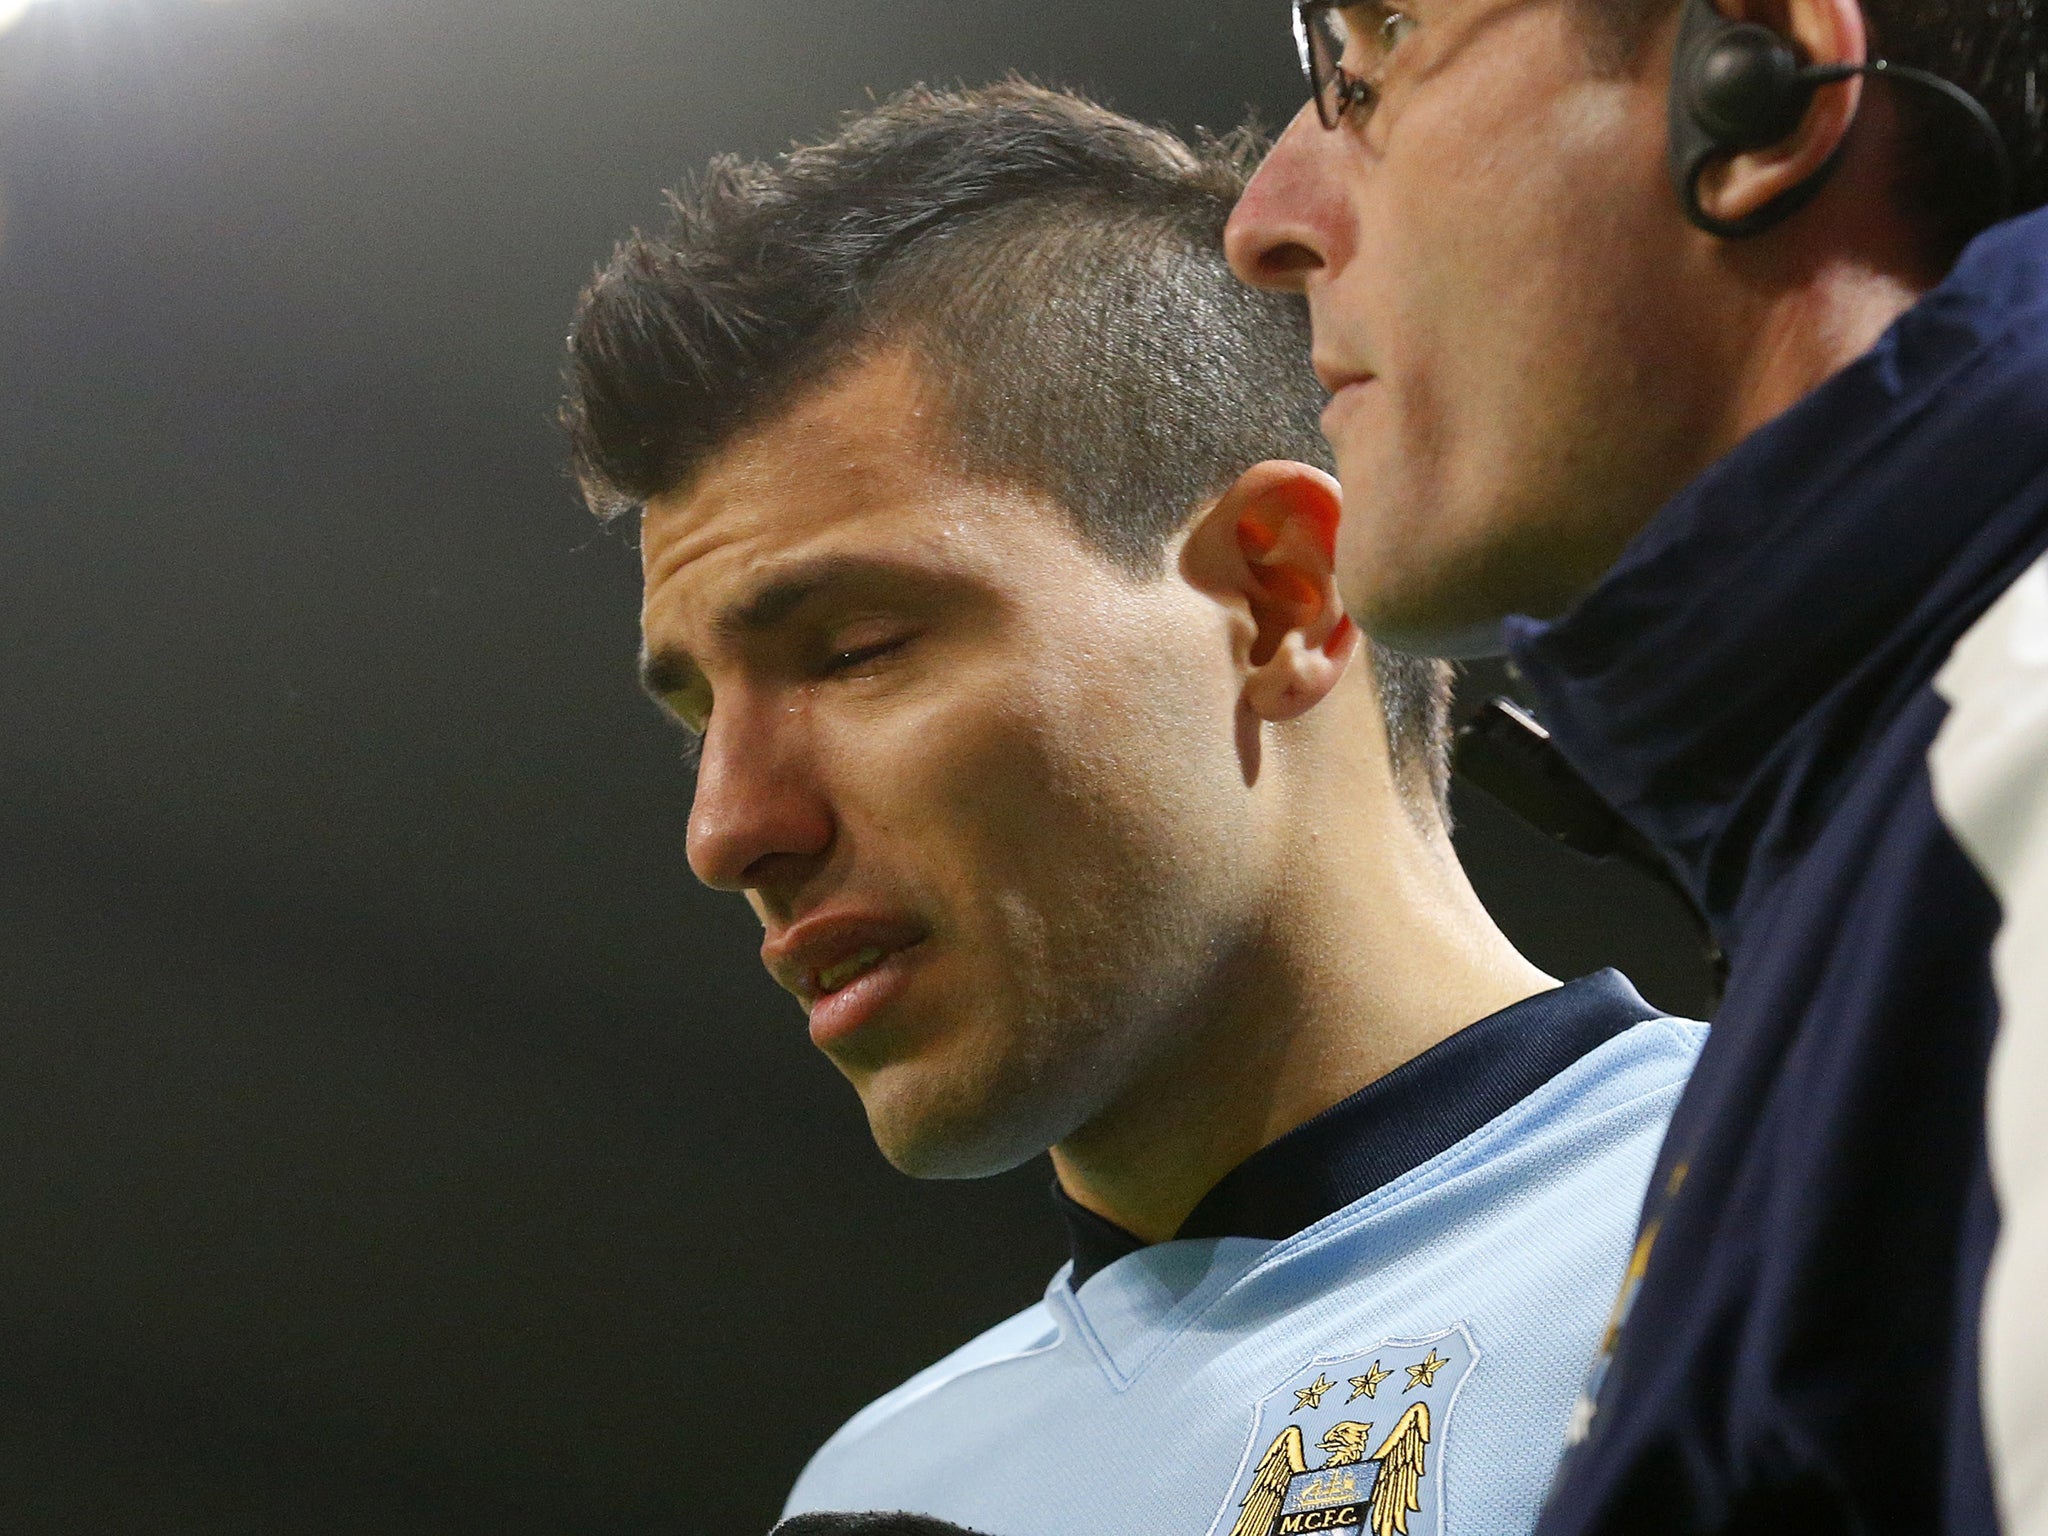 Sergio Aguero in tears as he leaves the pitch injured